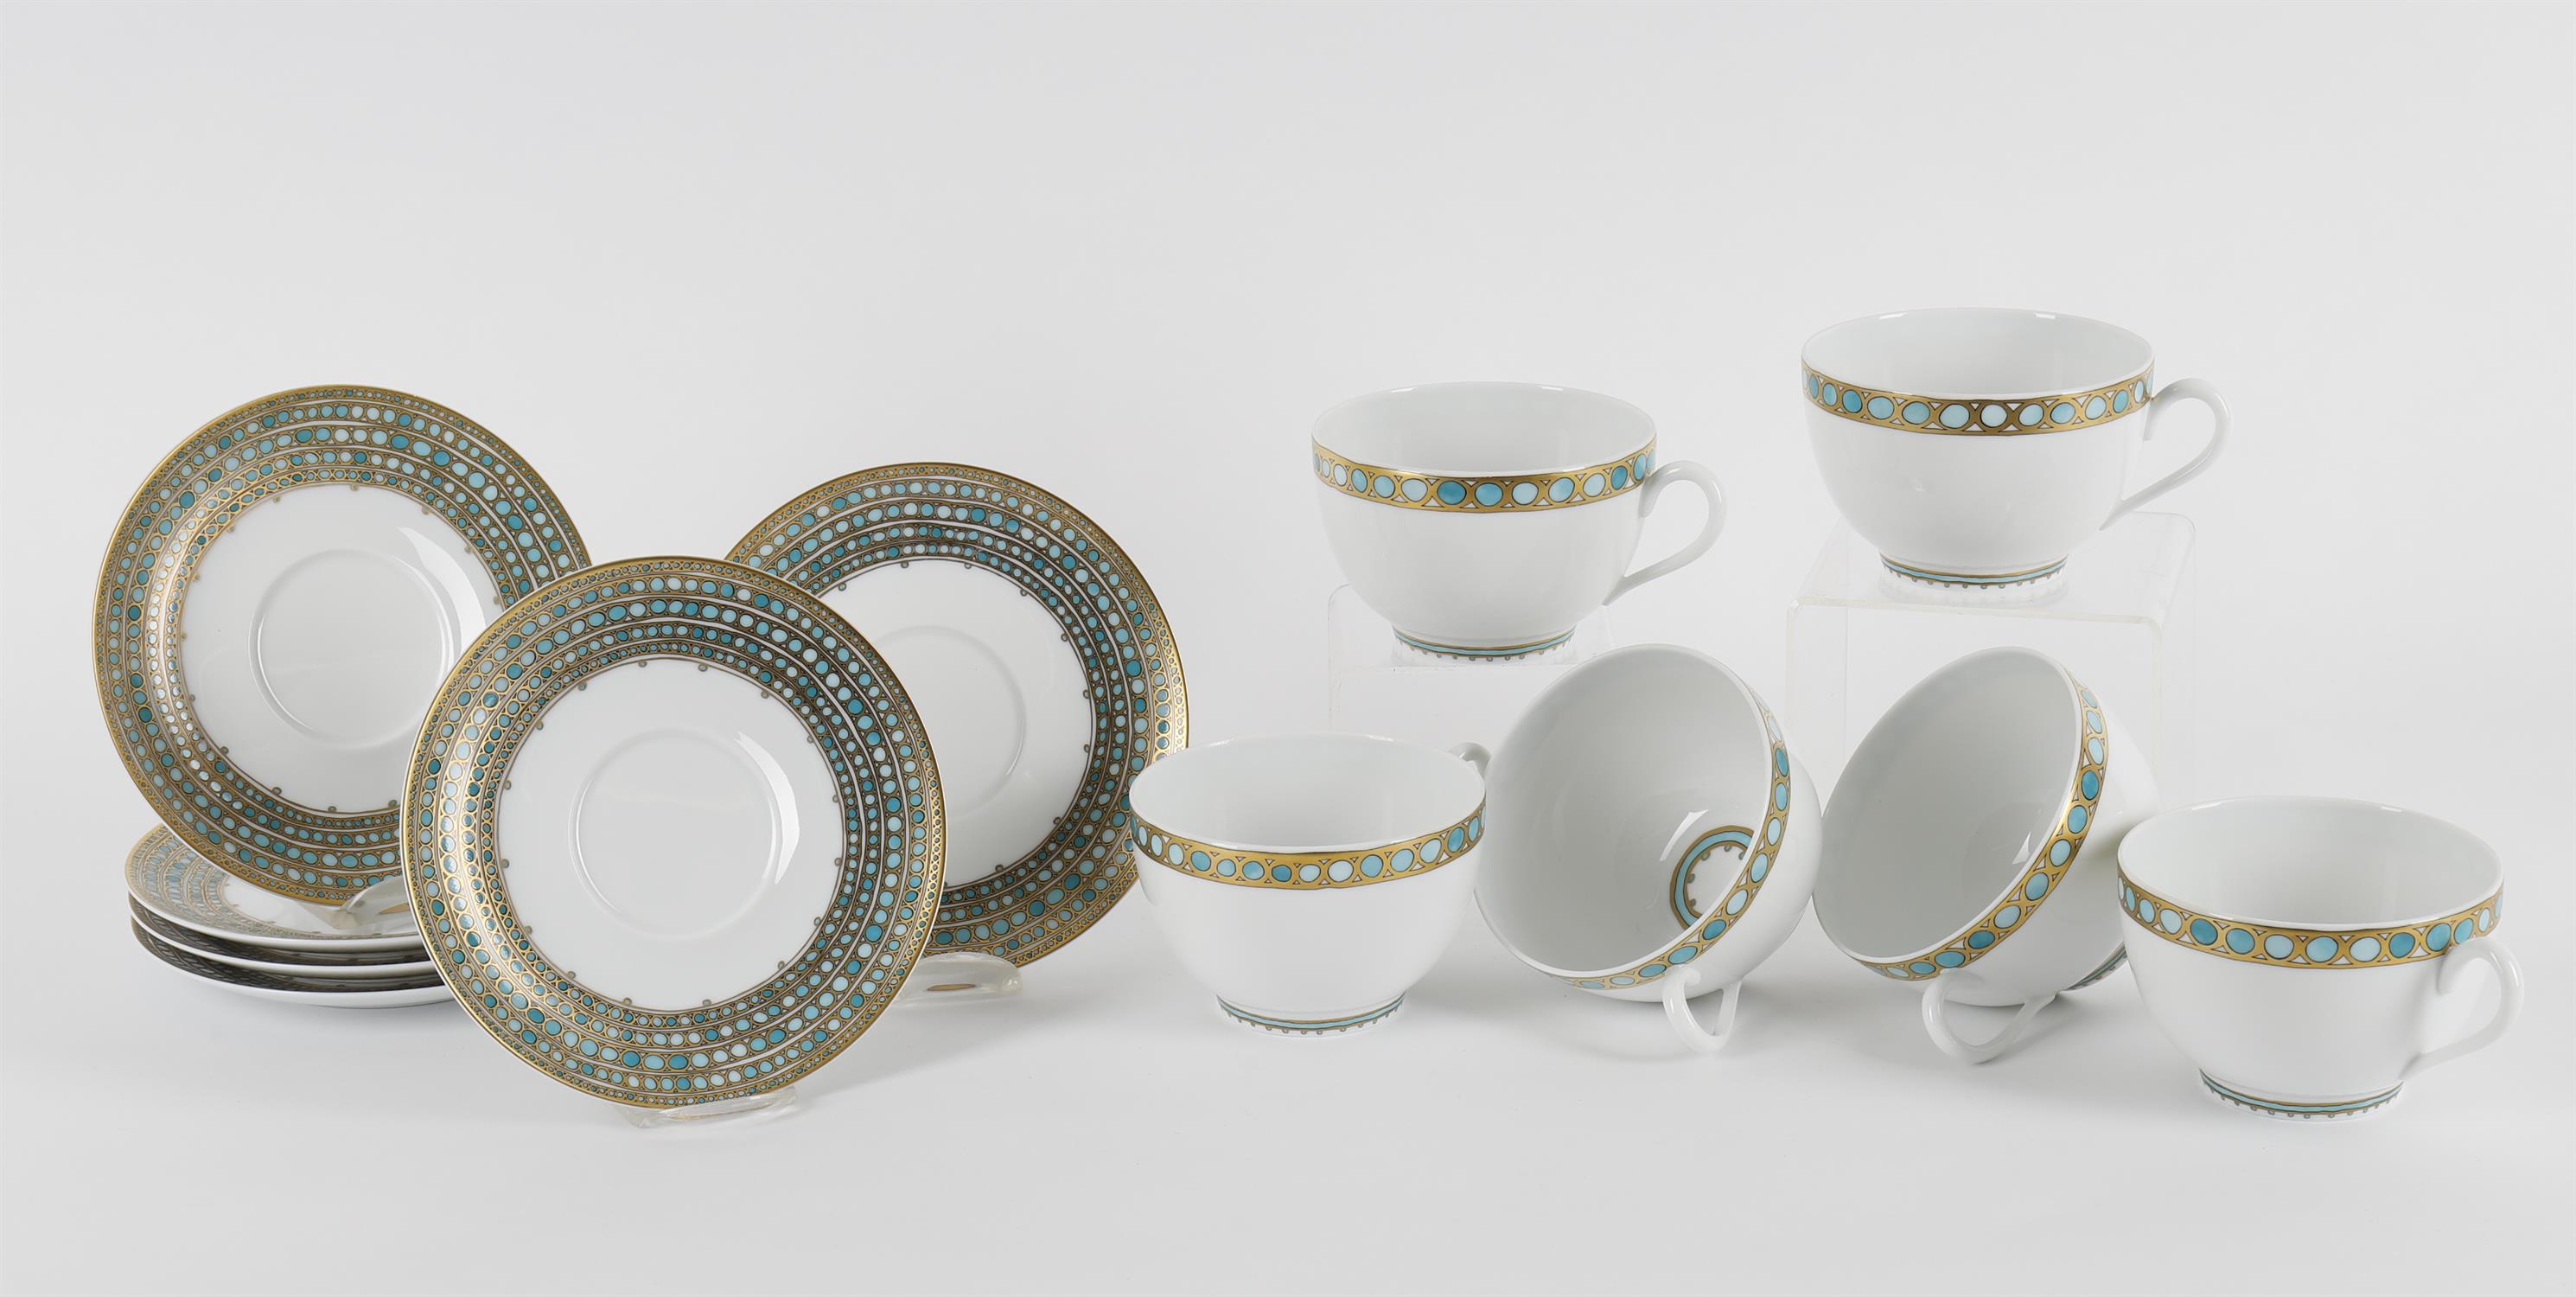 Six Haviland Limoges porcelain breakfast cups and saucers in the 'Syracuse' pattern